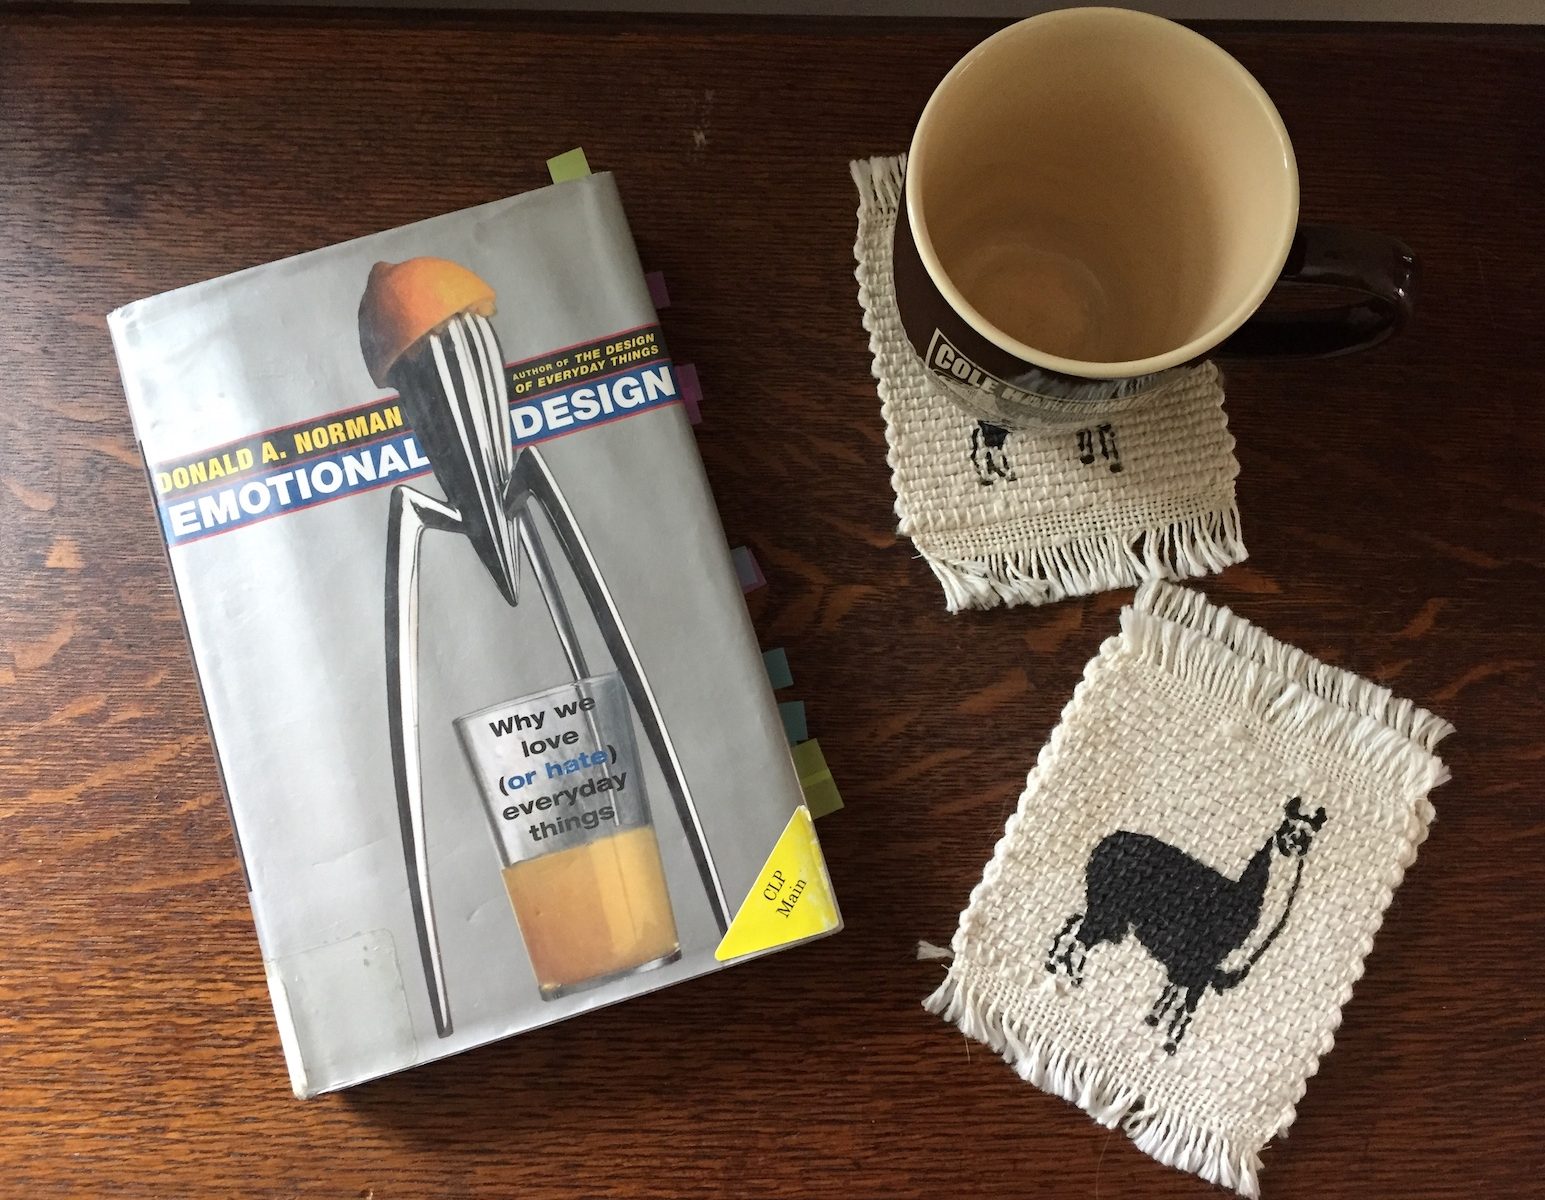 The book "Emotional Design" by Don Norman, sitting next to coasters depicting a llama and a brown coffee mug.